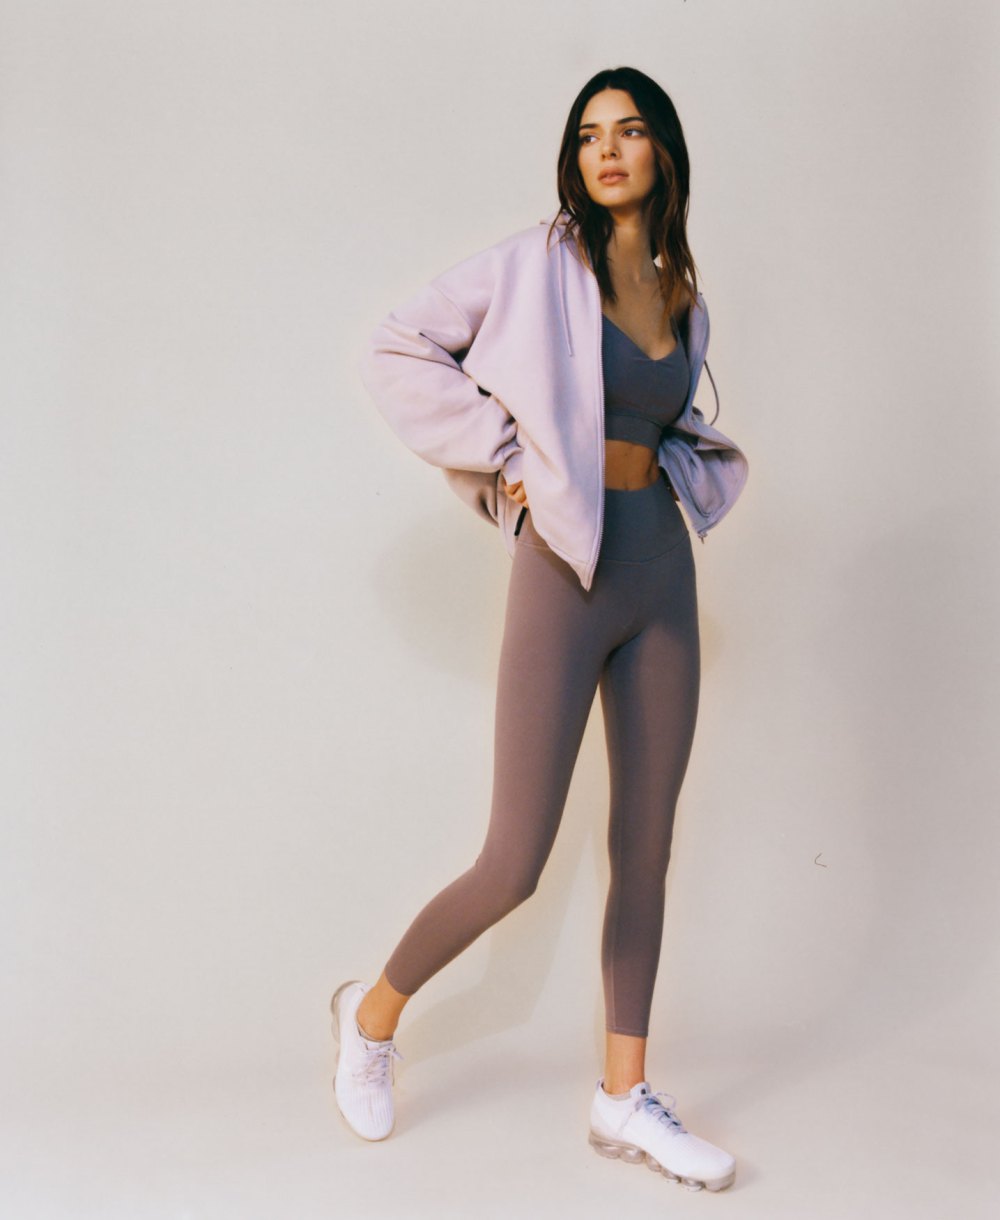 Kendall Jenner Self-Styled Her First Alo Yoga Campaign